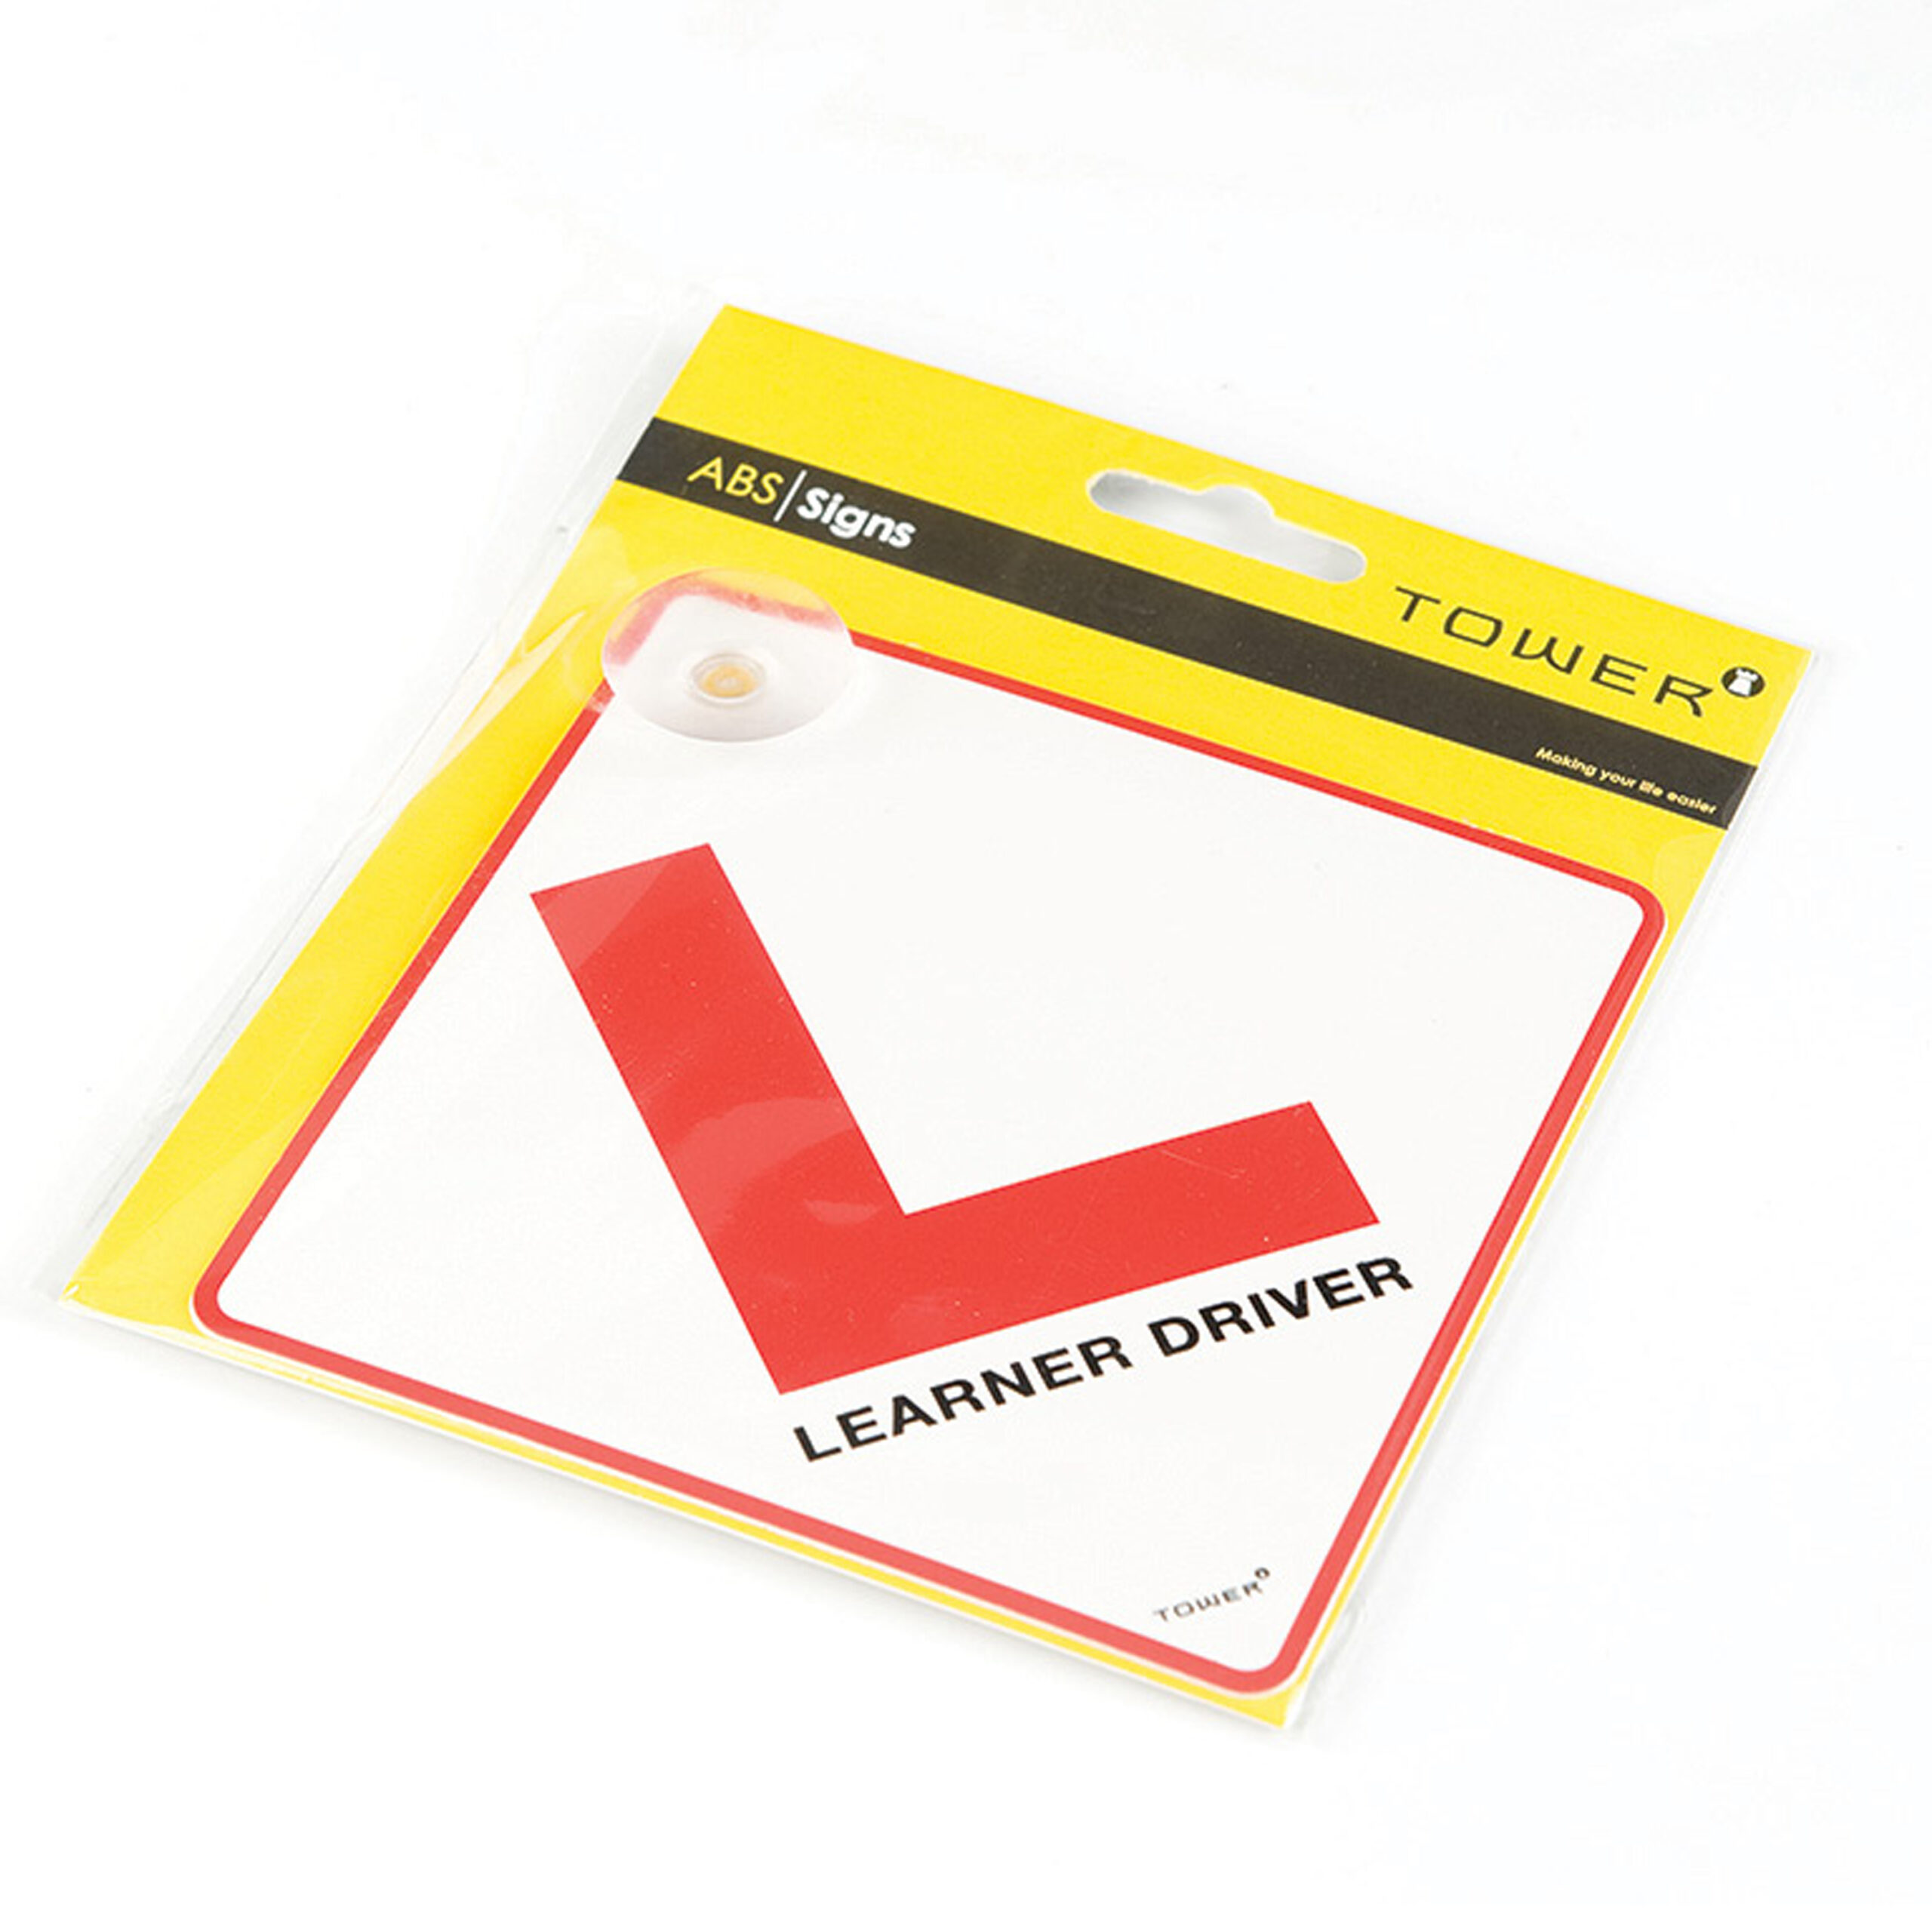 TOWER  "LEARNER
DRIVER" SIGNAGE 
135x135mm